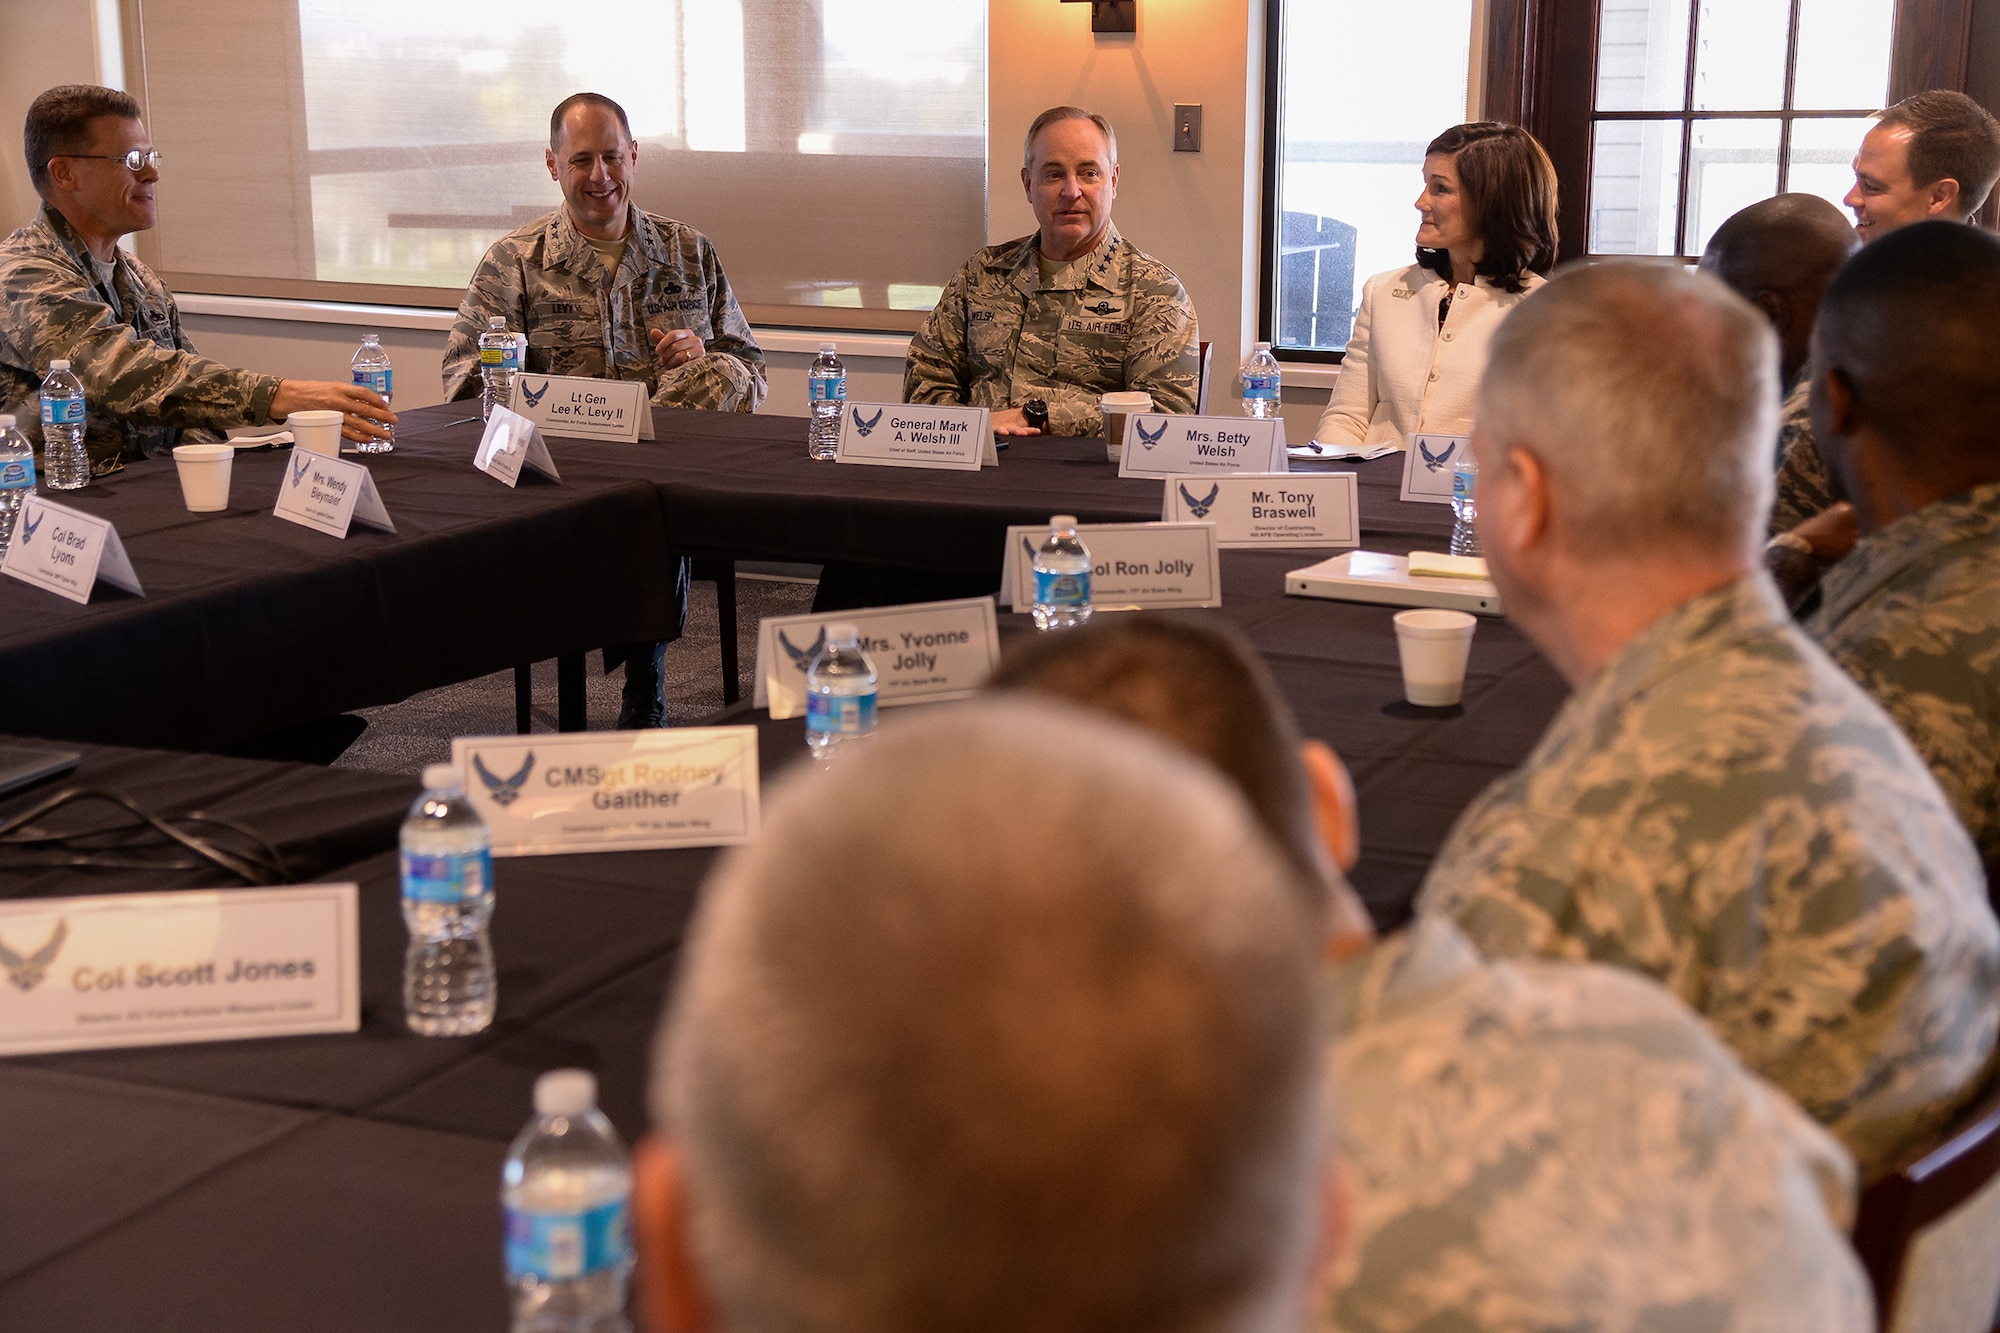 Air Force Chief of Staff Gen. Mark A. Welsh III and his wife Betty attend a Team Hill mission briefing at Hill Air Force Base, Utah, Thursday, Oct. 15, 2015. The briefing was given by Airman 1st Class Shawn Gaines, 75th Security Forces Squadron, and Airman 1st Class Conner Whetstone, 75th Air Base Wing. (U.S. Air Force photo by R. Nial Bradshaw/Released)